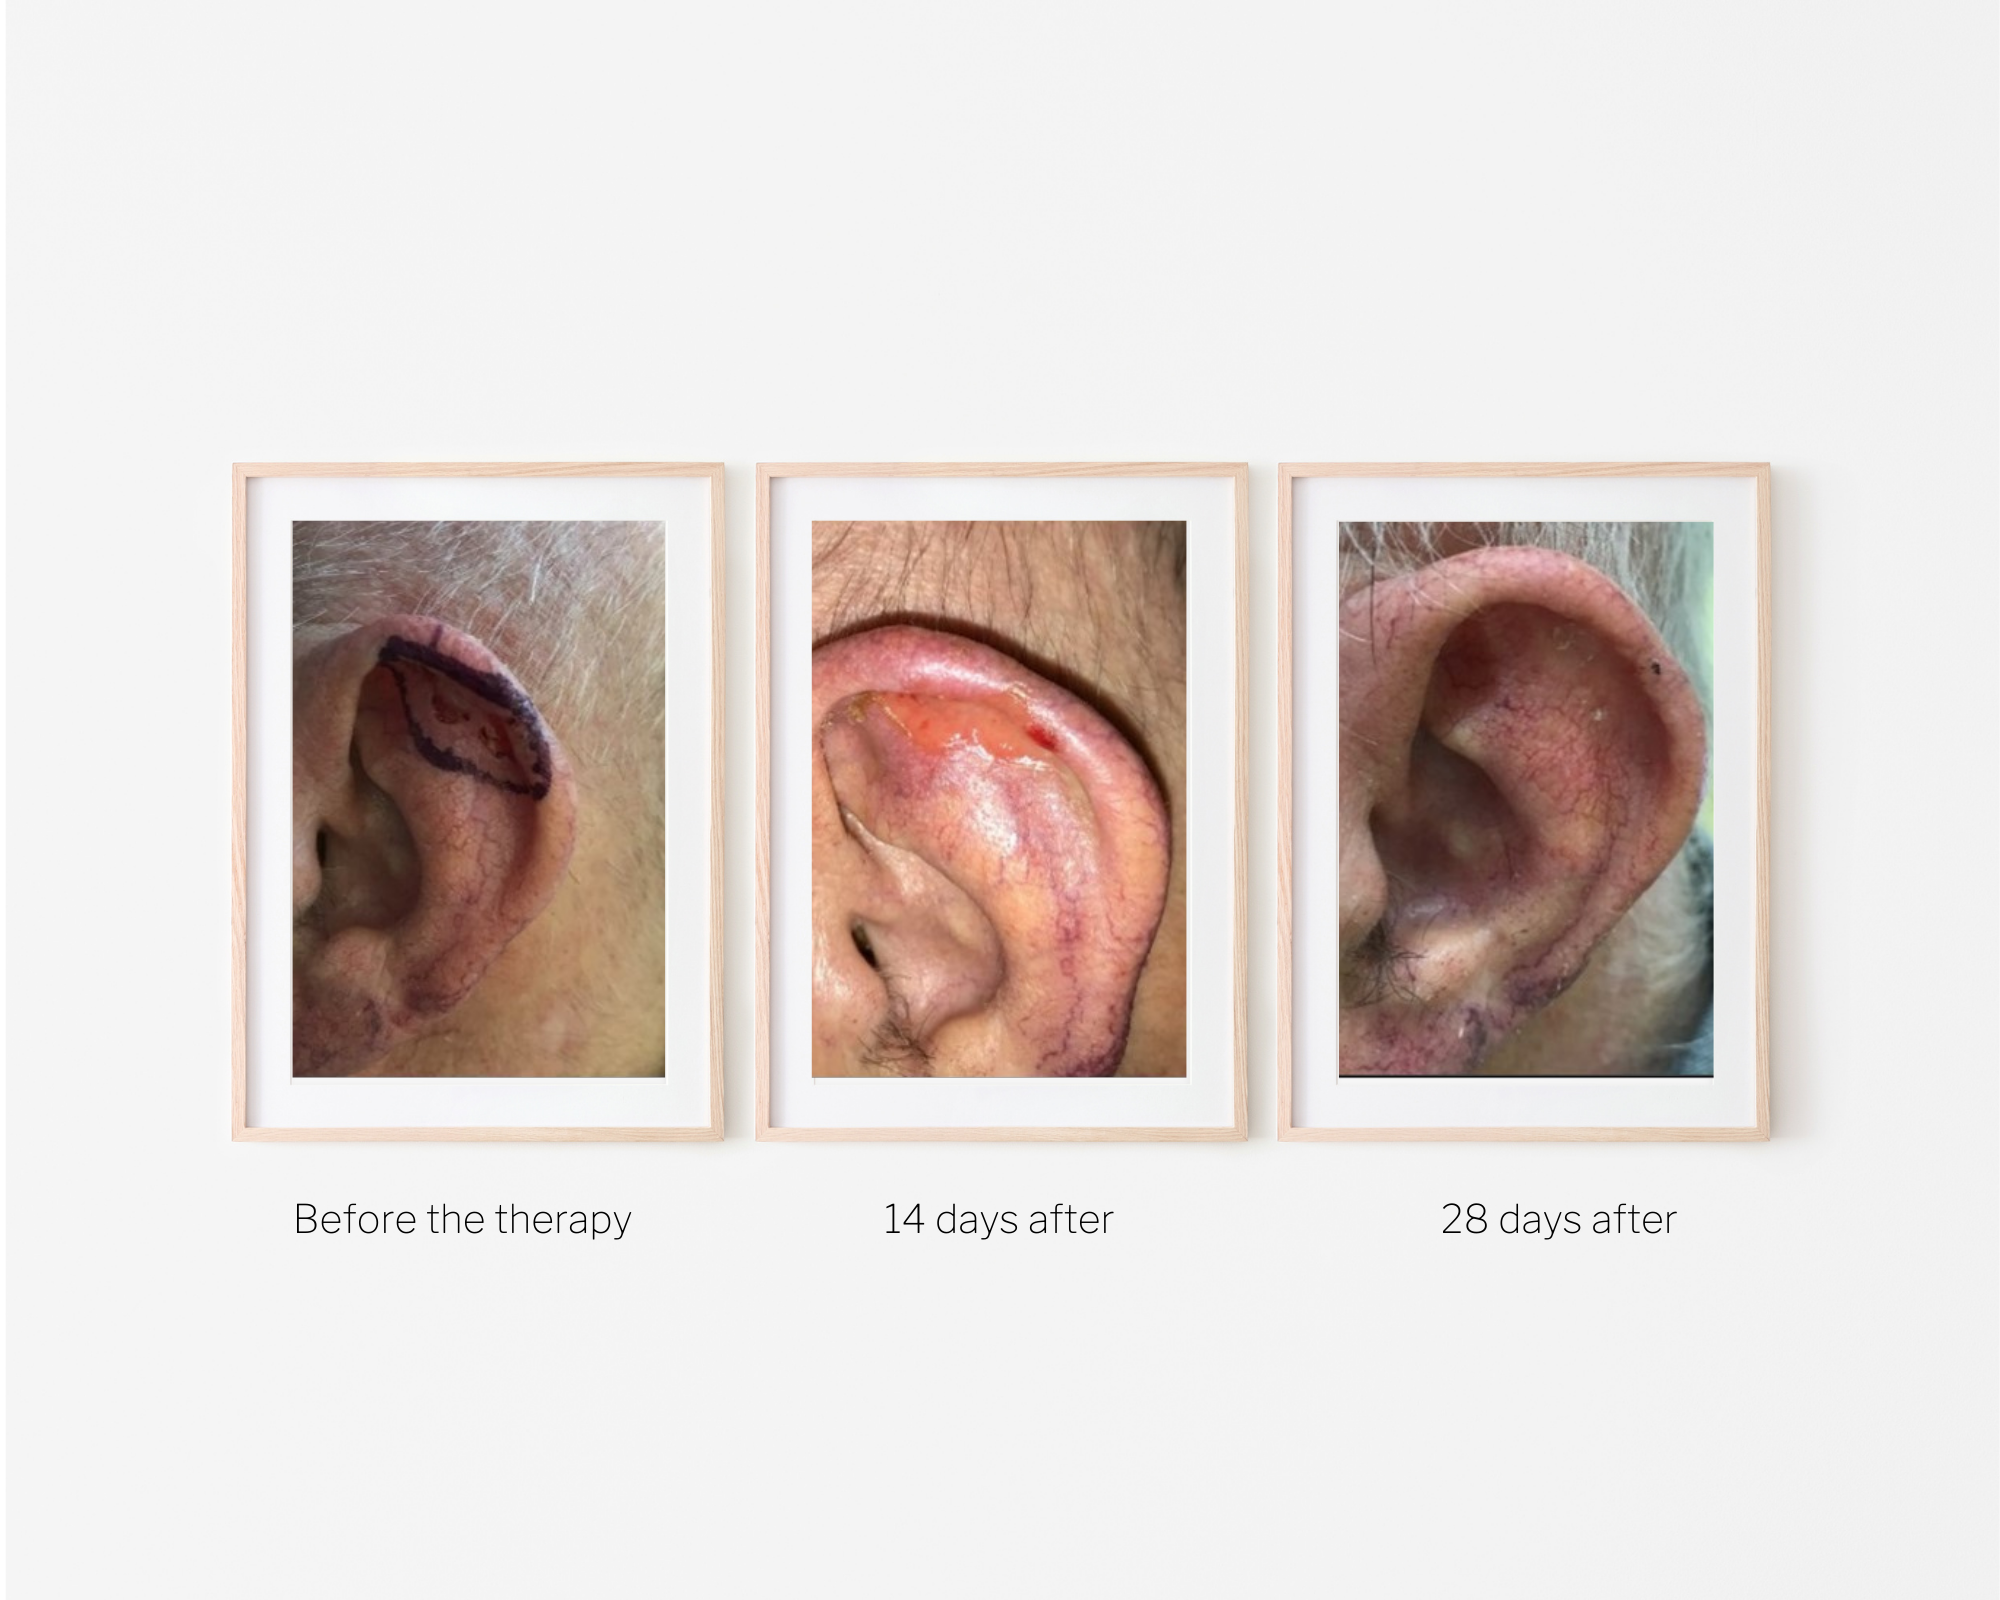 Image collage of a lesion on an ear before the treatment, two weeks after the treatment and one month after the treatment